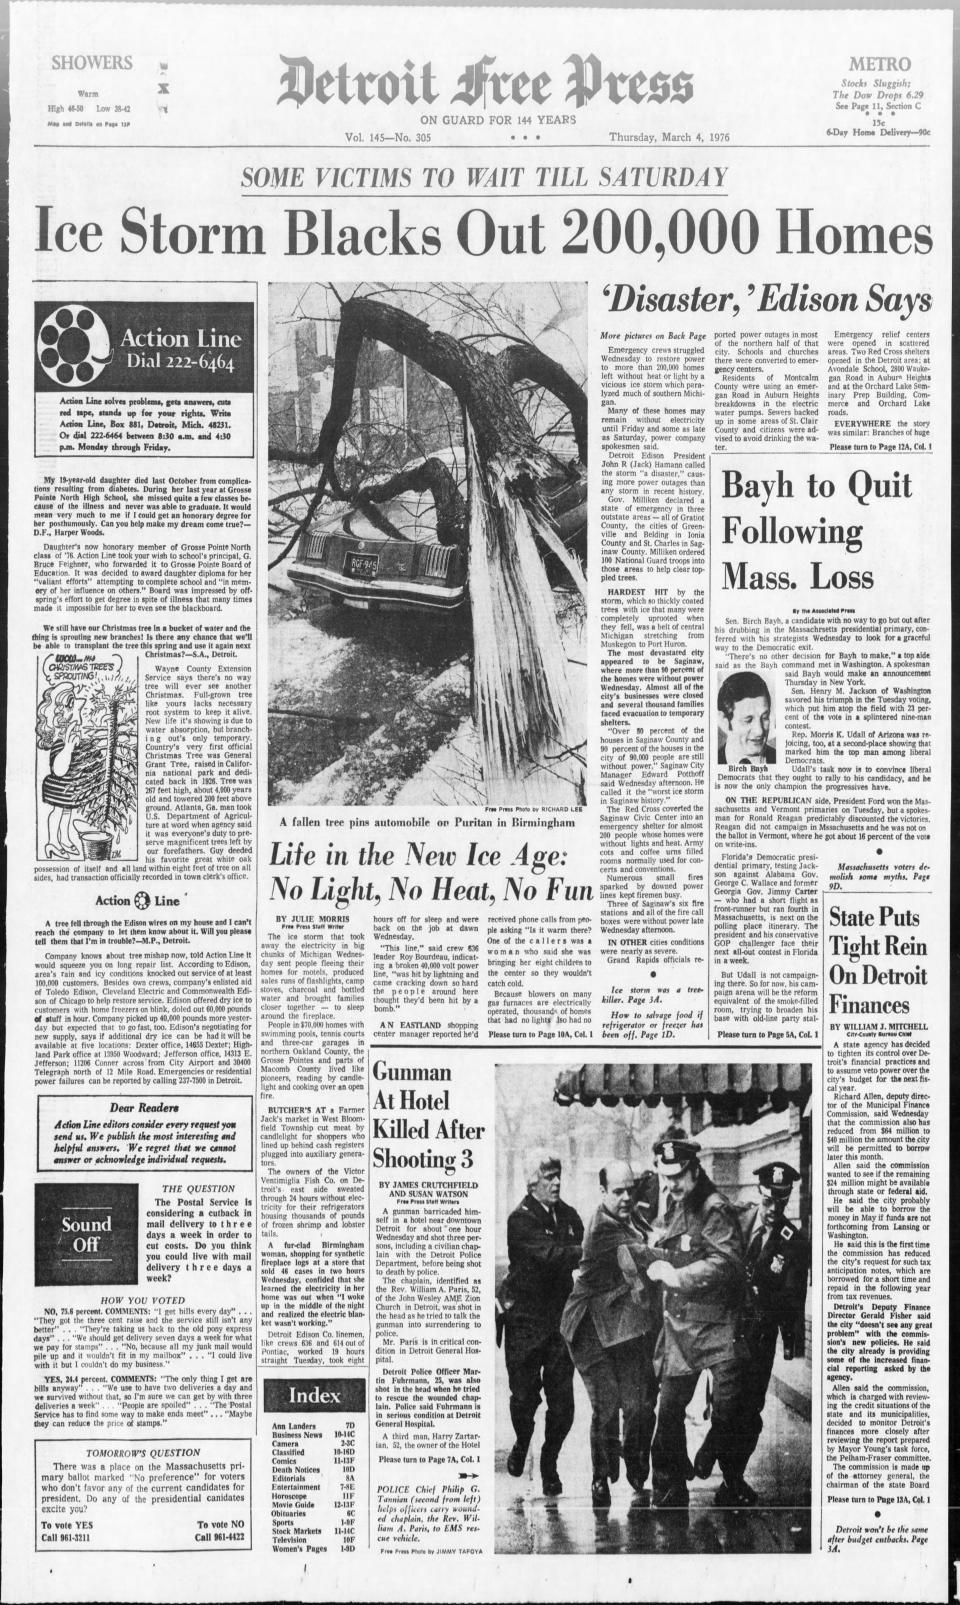 March 4, 1976 edition of the Detroit Free Press' front page